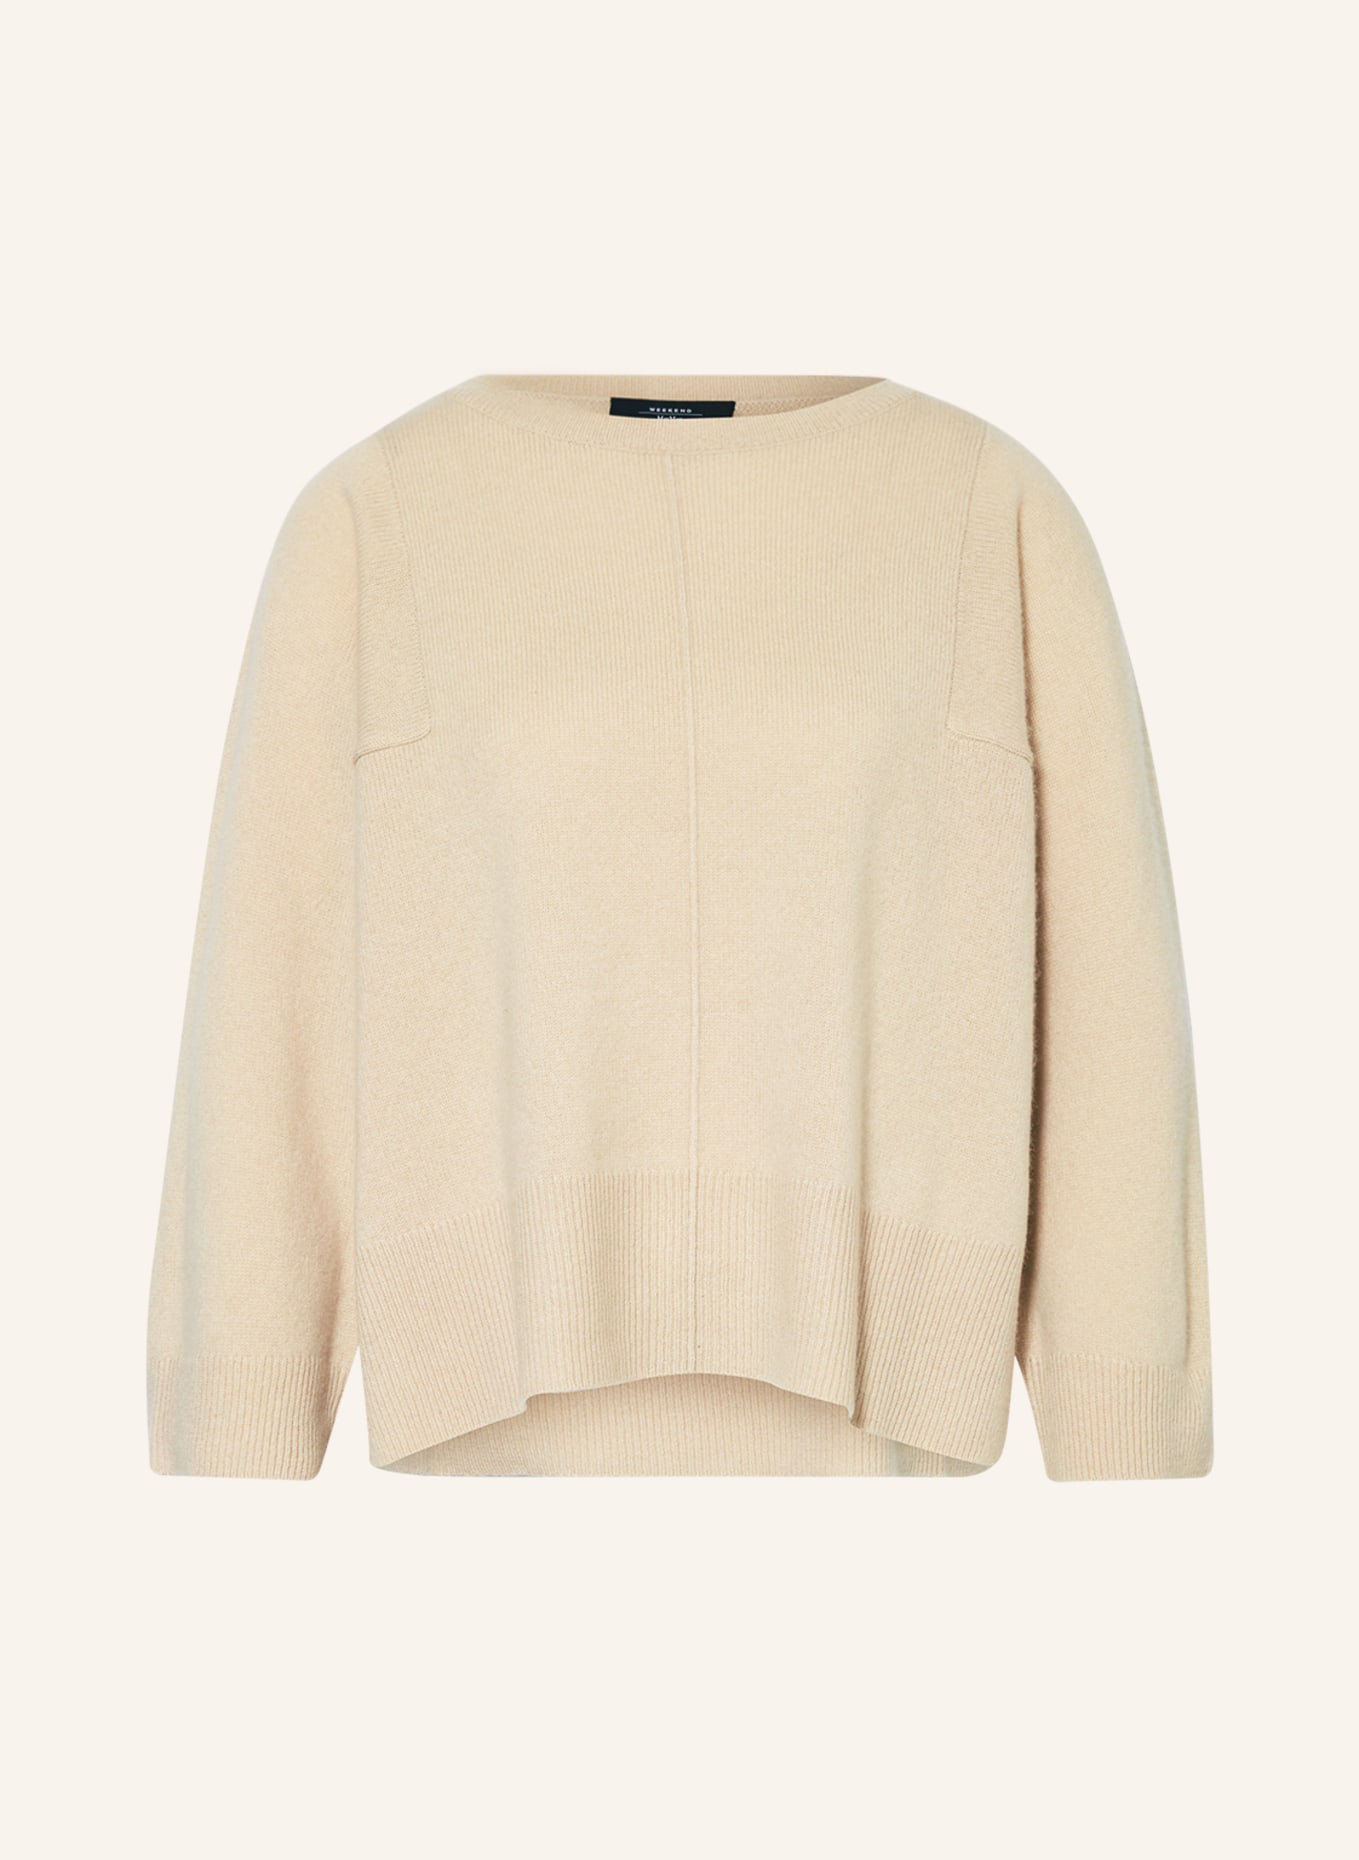 WEEKEND MaxMara Cashmere sweater ALCE with 3/4 sleeves, Color: BEIGE (Image 1)